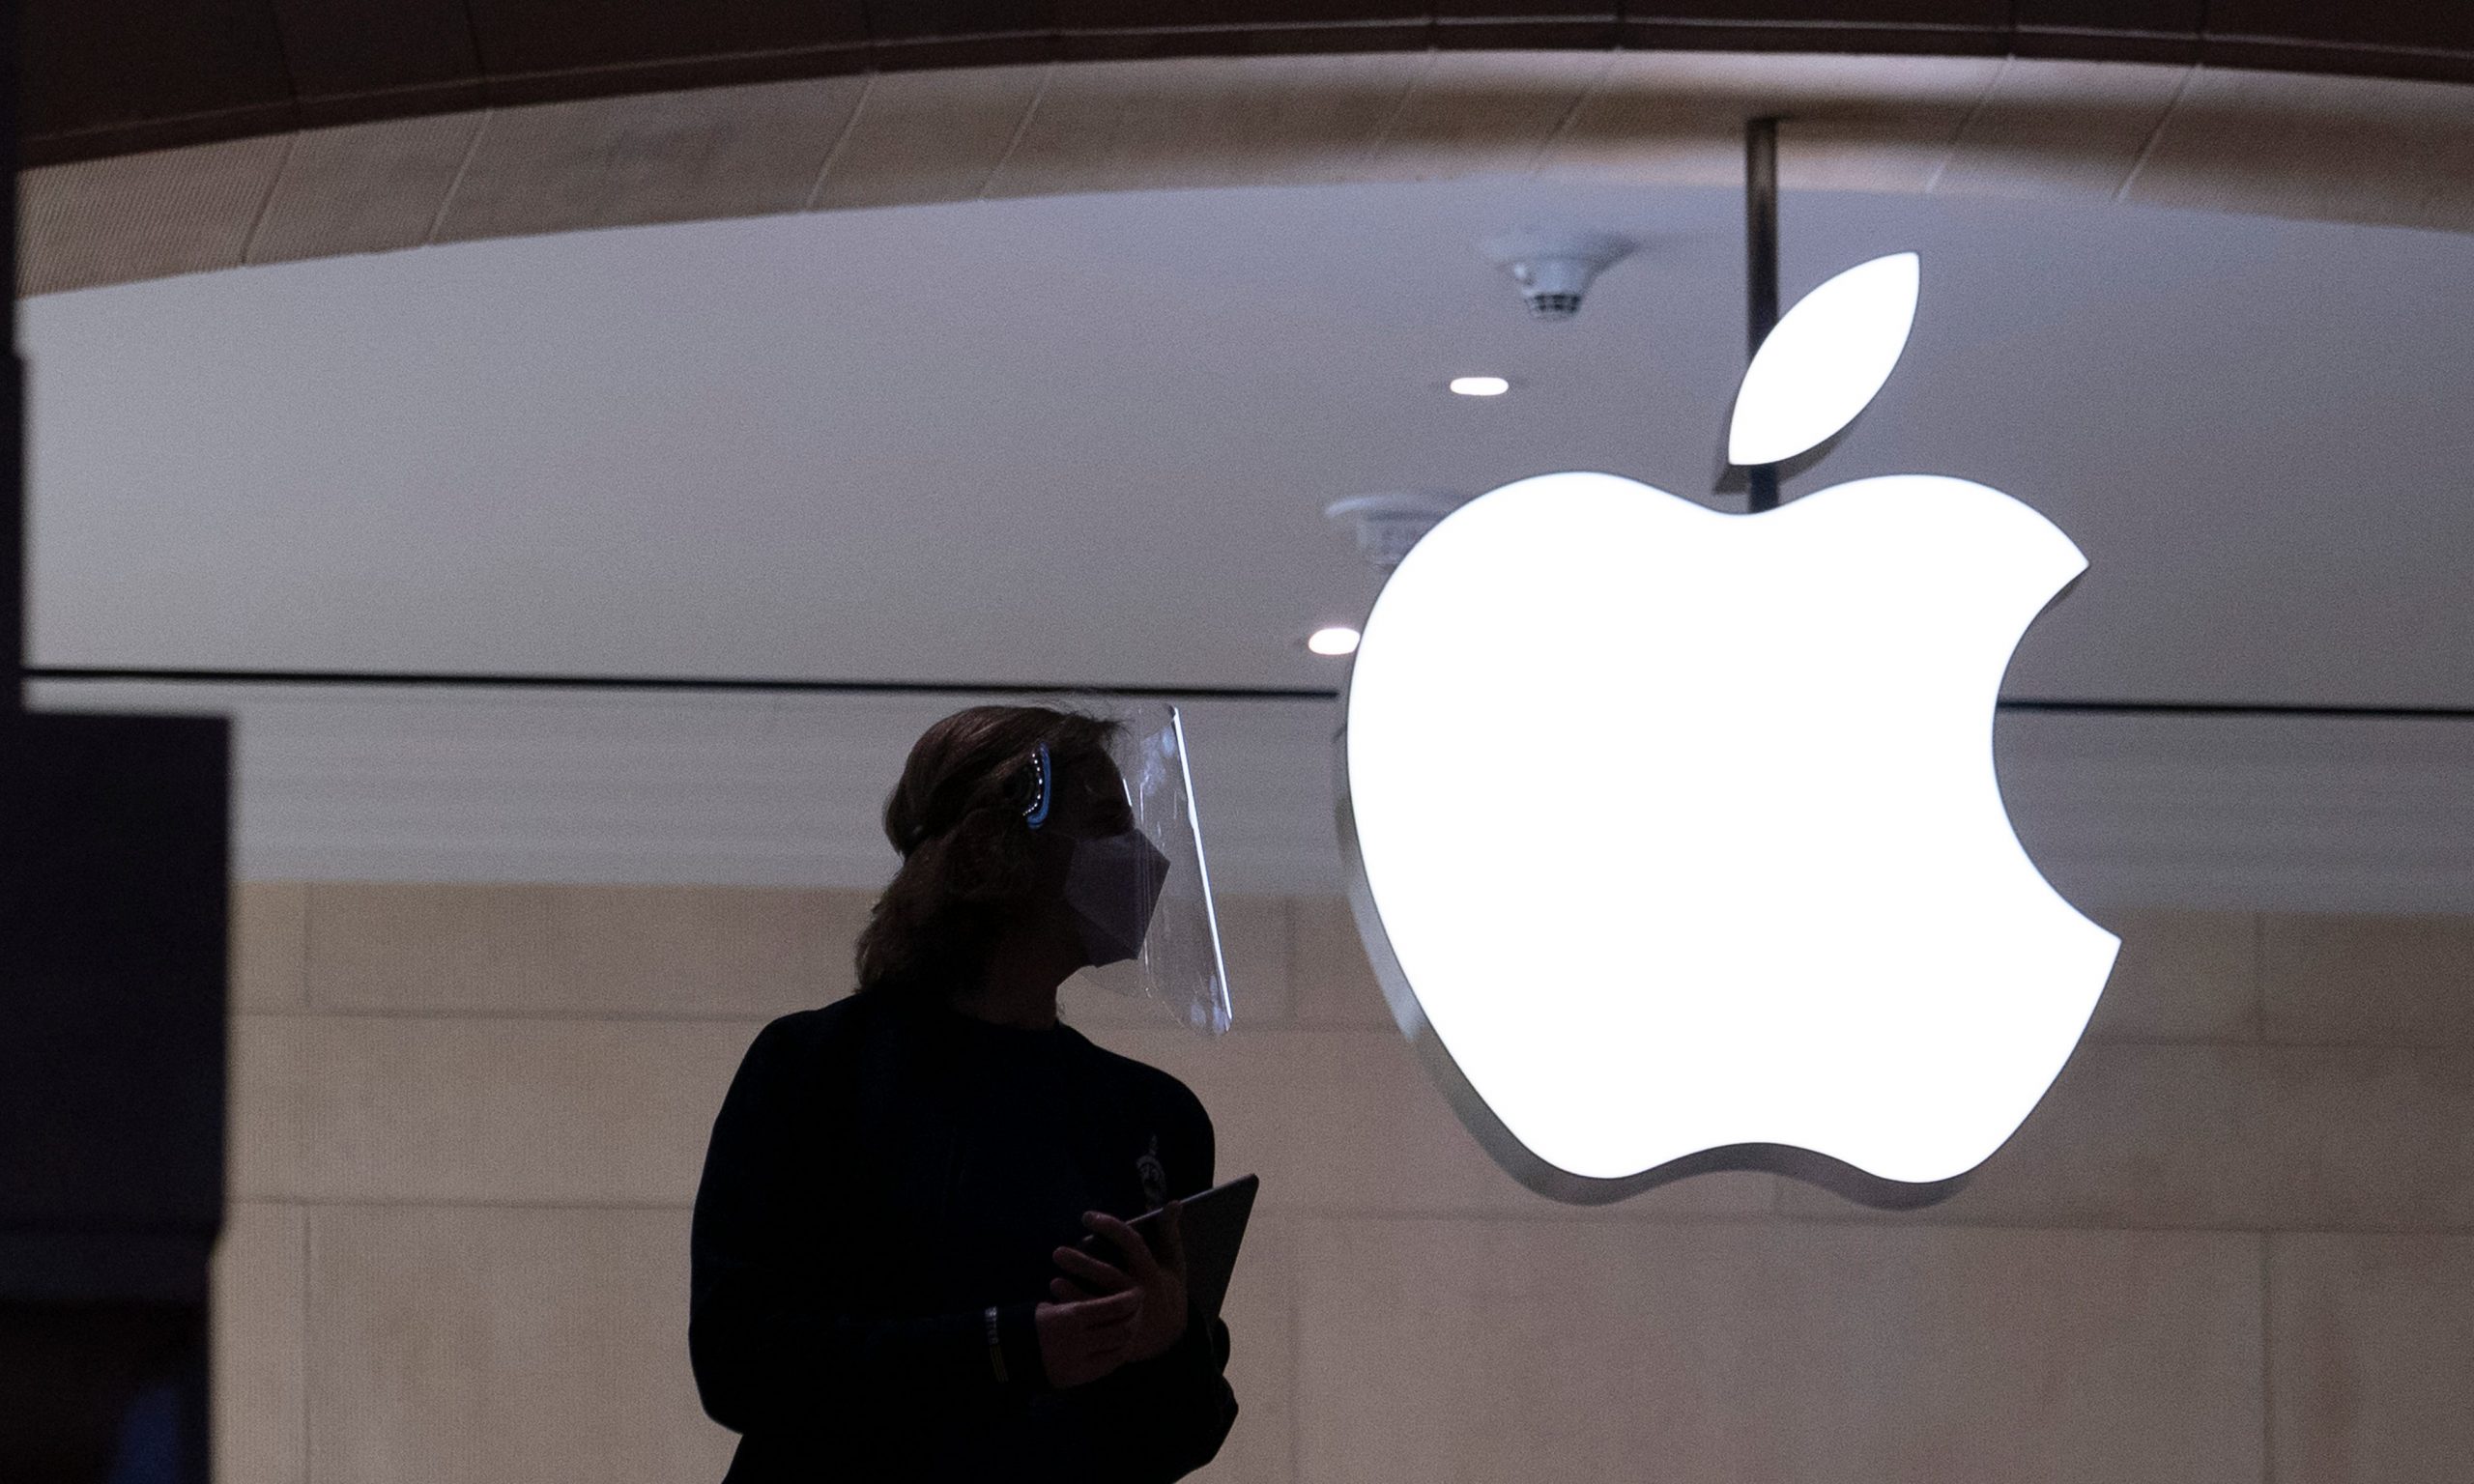 An Apple store employee's dark silhouette next to a white glowing Apple logo